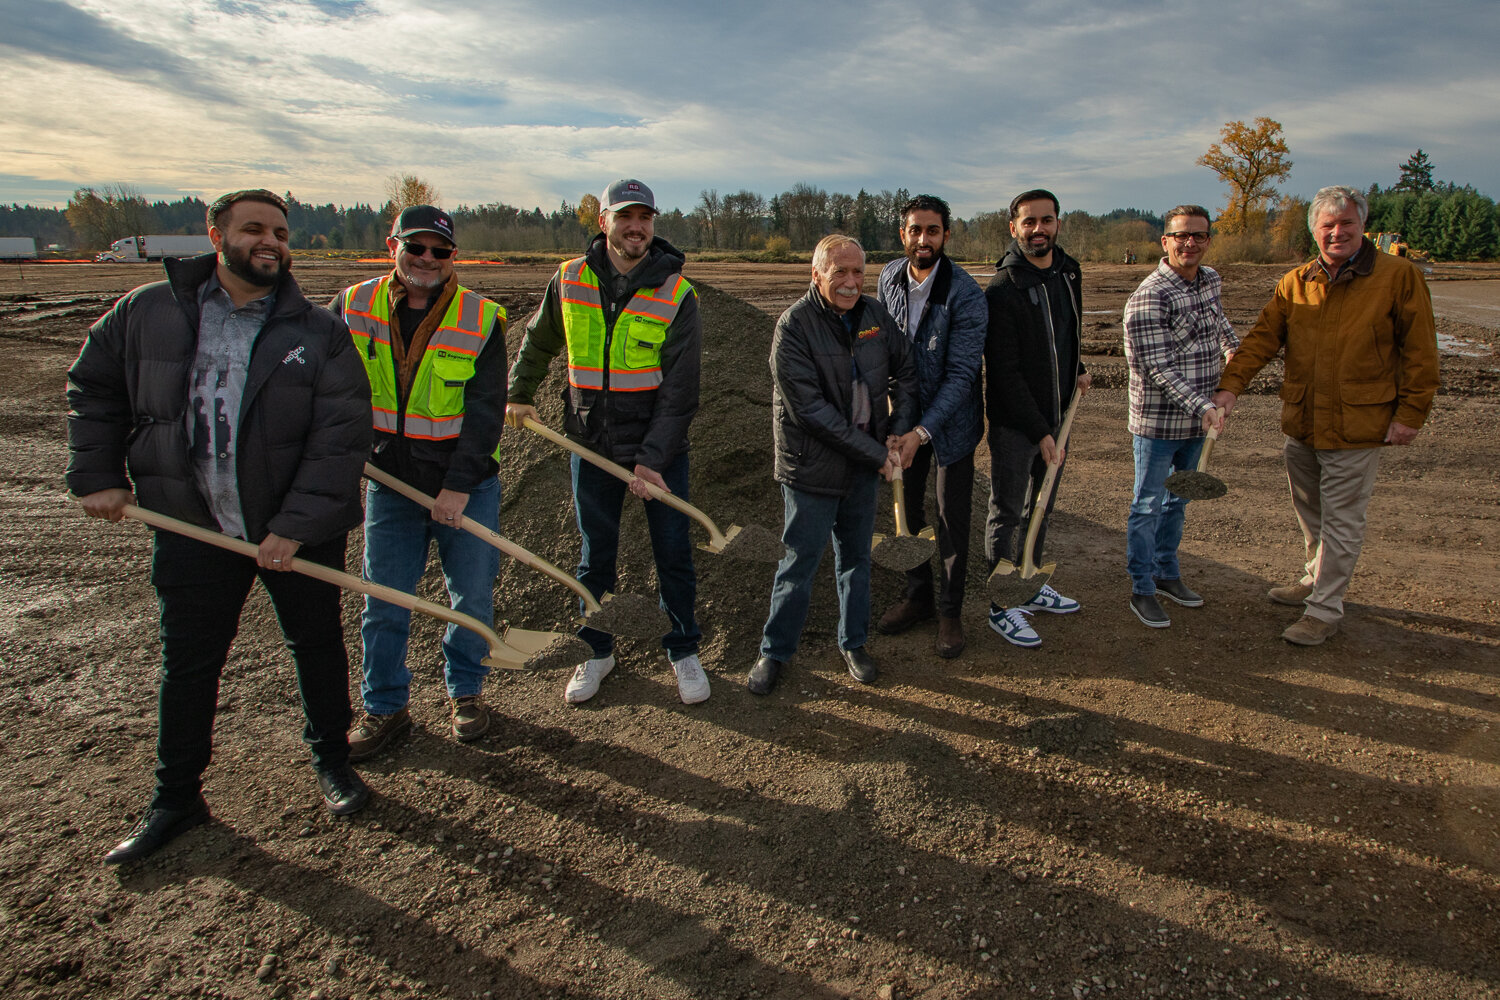 From the left, TA Napavine co-owner Damanjit Singh, Bob Balmelli and Zach Wirkkala of RB Engineering, Sterling Breen of Sterling Breen Crushing,TA Napavine co-owner Gurinderjit Sidhu, TA Napavine co-owner Manpreet Singh, Jake Iverson of Sterling Breen Crushing and Jim Mayer of Mountain Construction post for a ceremonial groundbreaking photo on Nov. 21 as construction on the new TA truck stop in Napavine has officially begun.